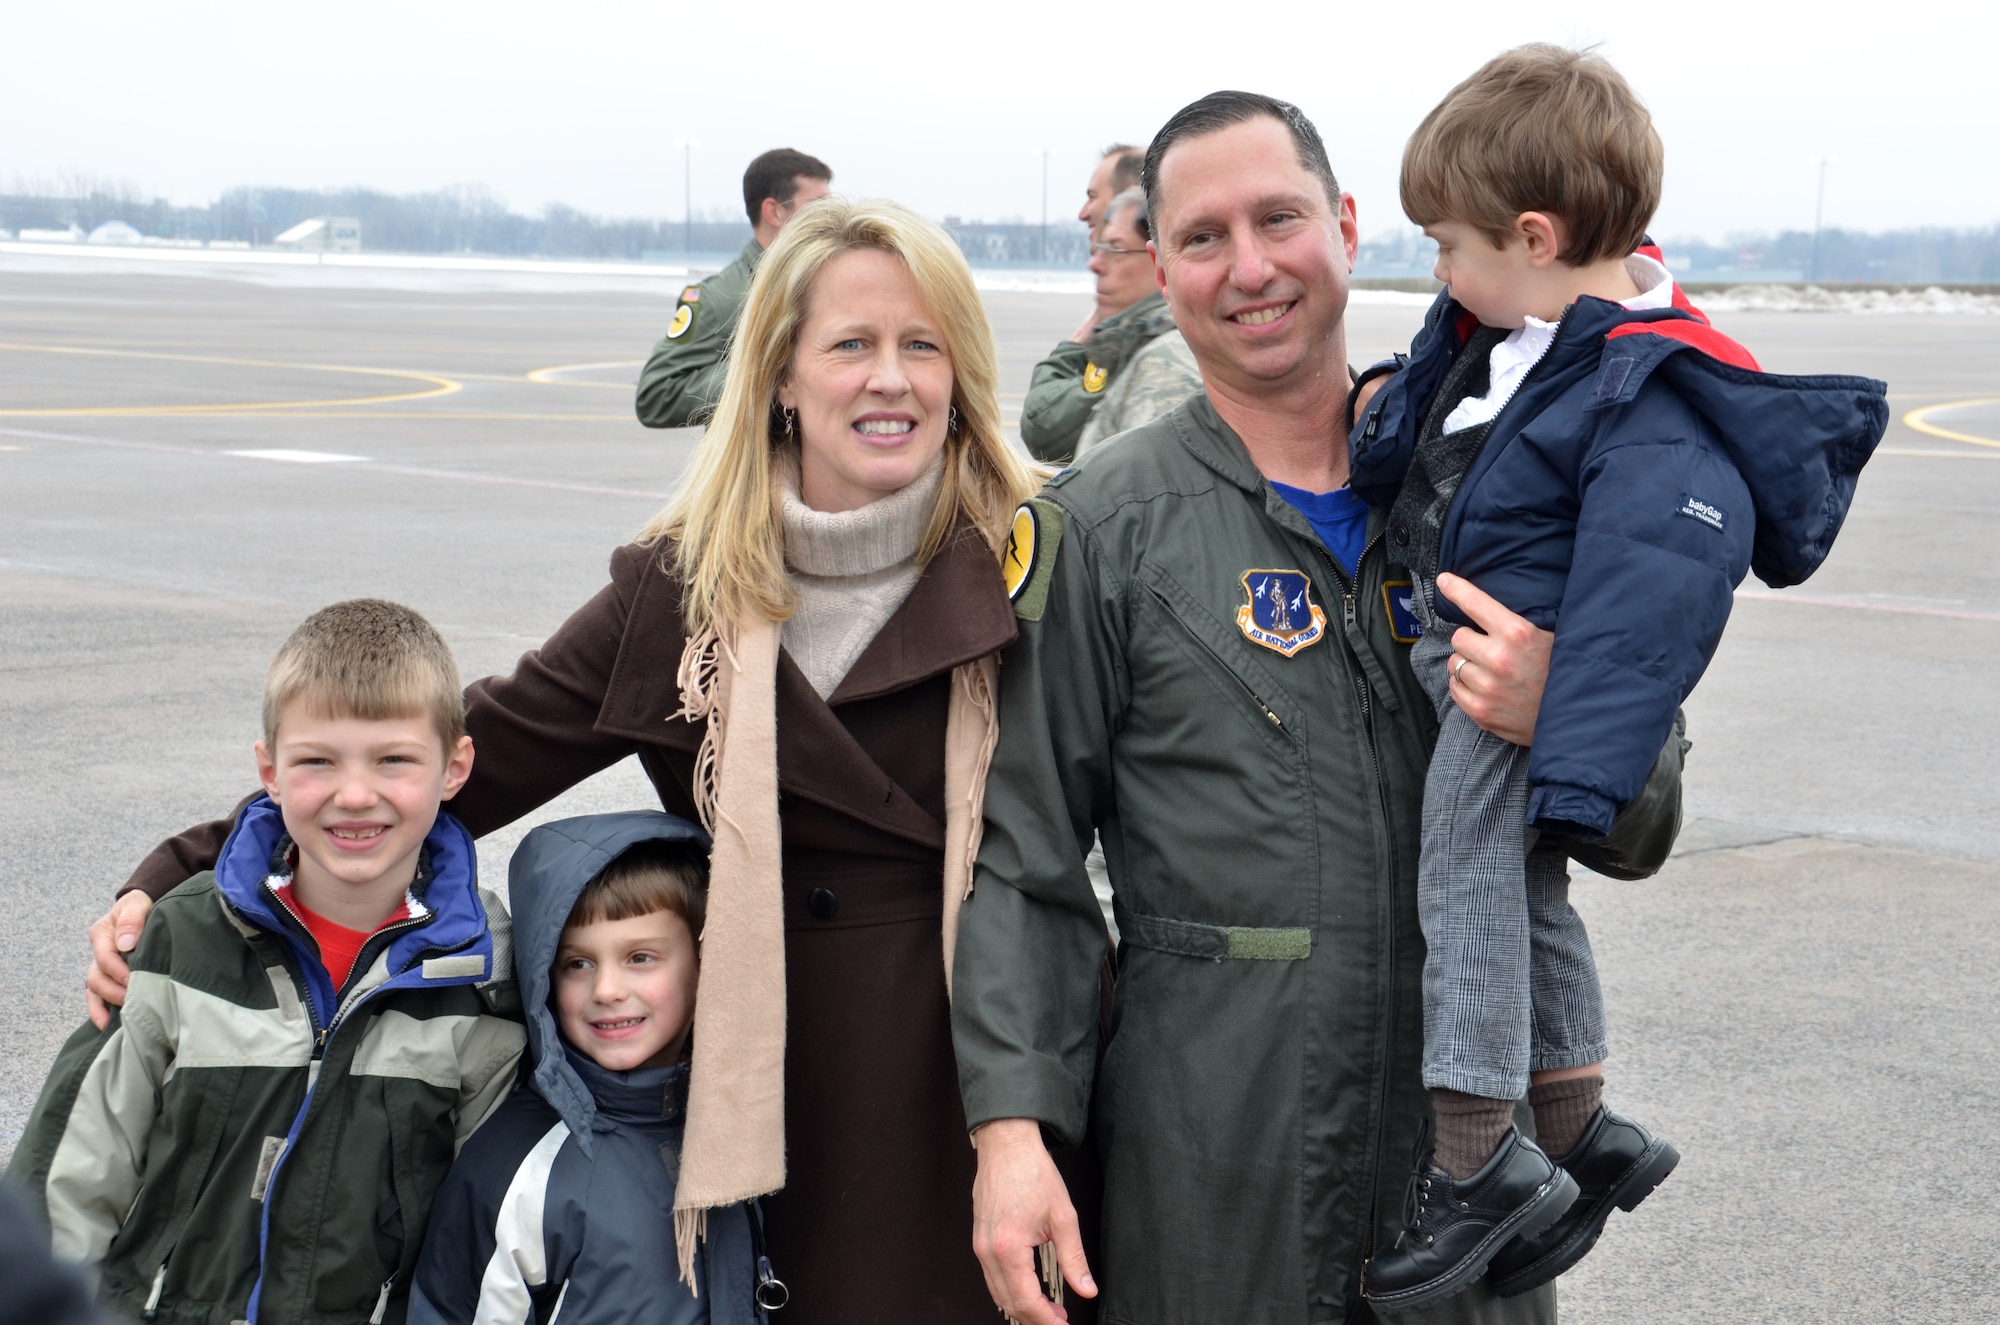 Col. Pete “Meat” Siana is surrounded by his family after completing his “fini-flight” March 3, 2012, at Bradley Air National Guard Base, East Granby, Conn. With Siana are his wife Dawn and three boys Peter, 7, Joseph, 6 and Jack, who is 2. (U.S. Air Force photo by Tech. Sgt. Joshua Mead)